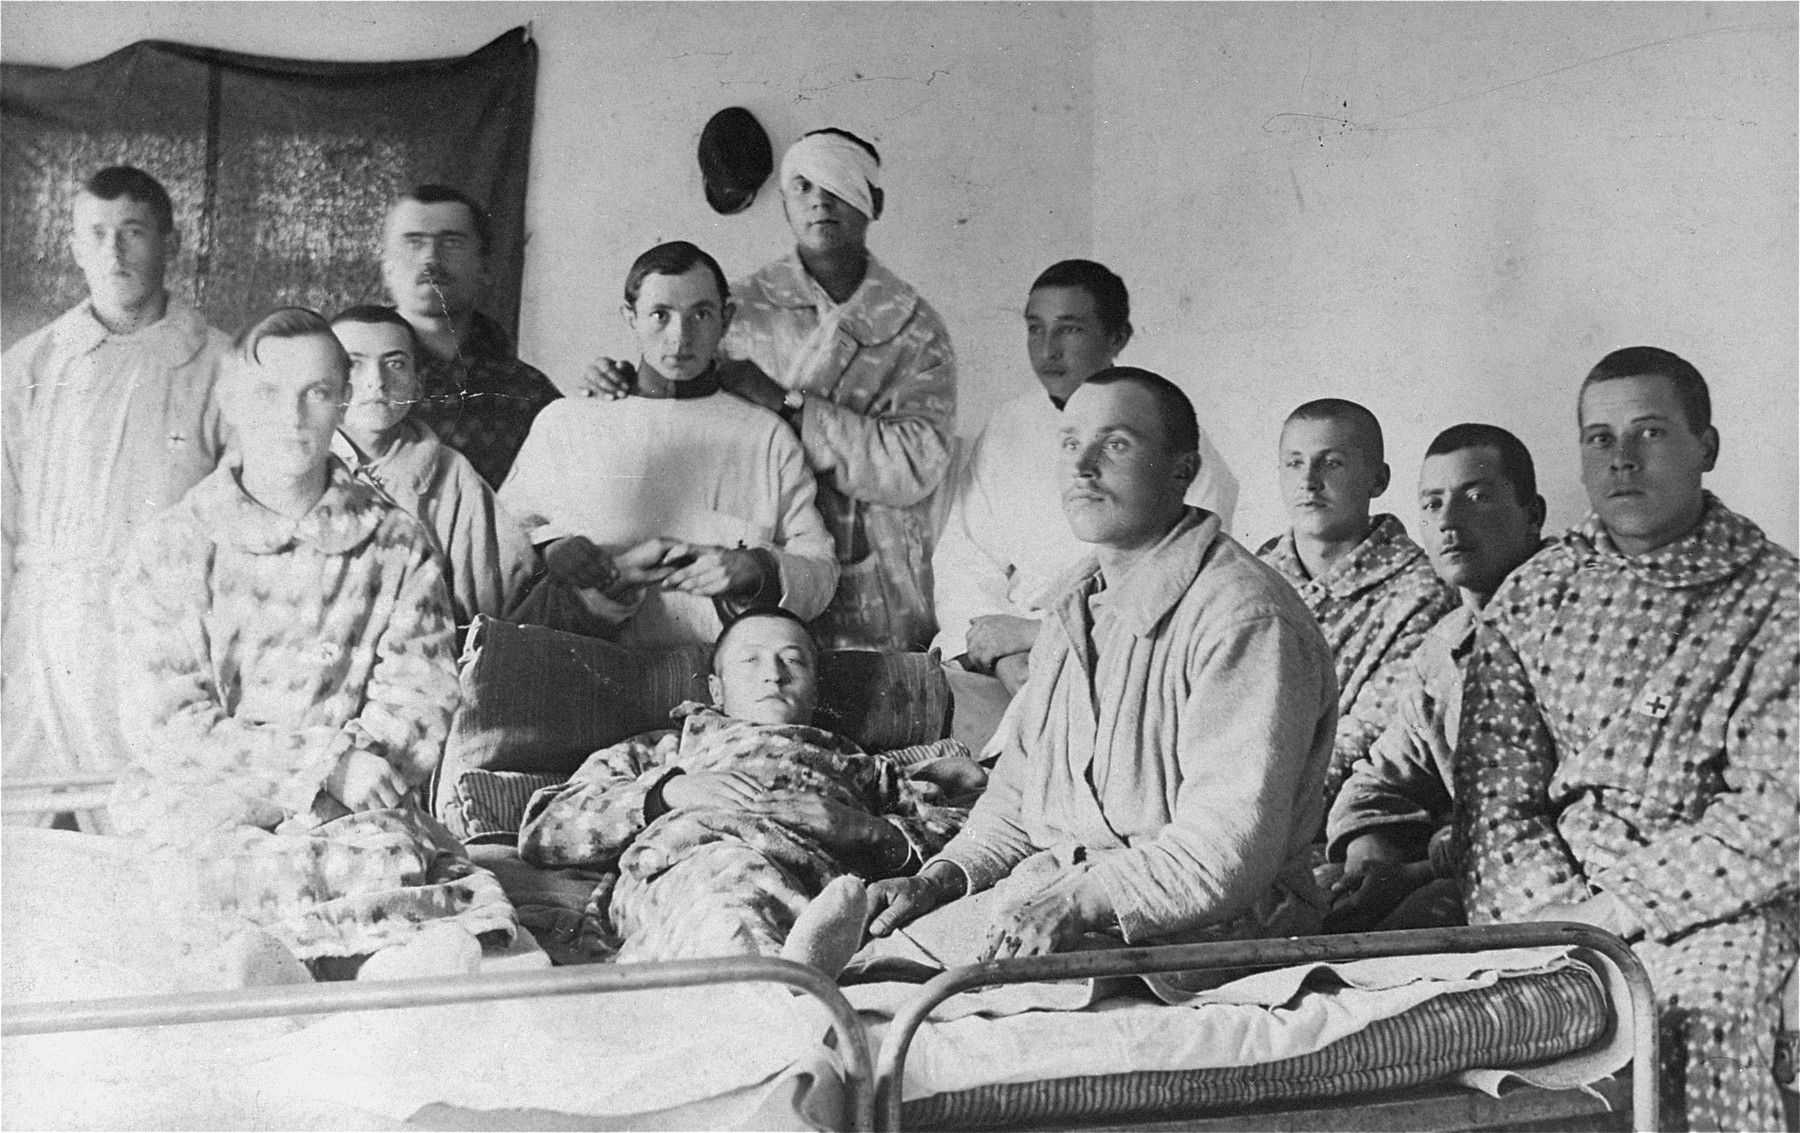 Group portrait of convalescing soldiers in a hospital [possibly Jewish veterans of the First World War in Minsk].